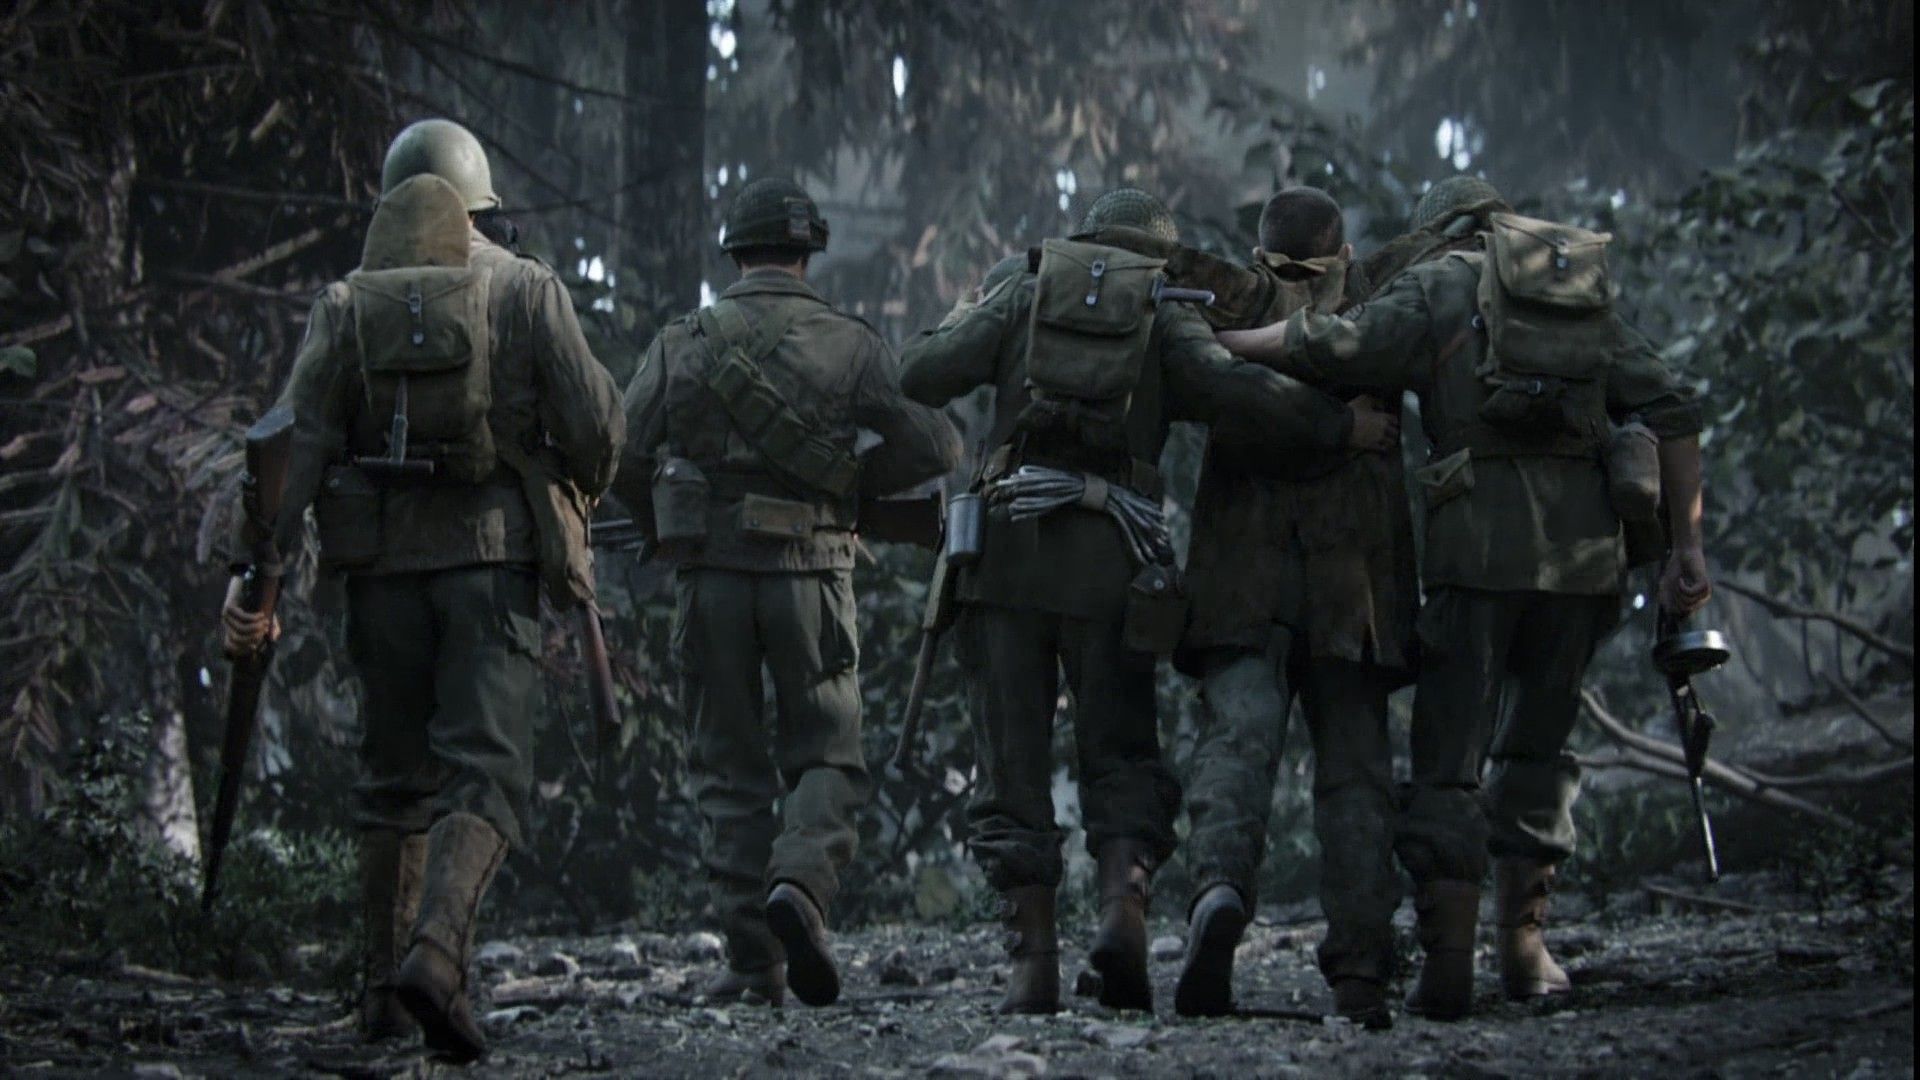 soldier, Call of Duty World War II, Video games, Forest, Blurred